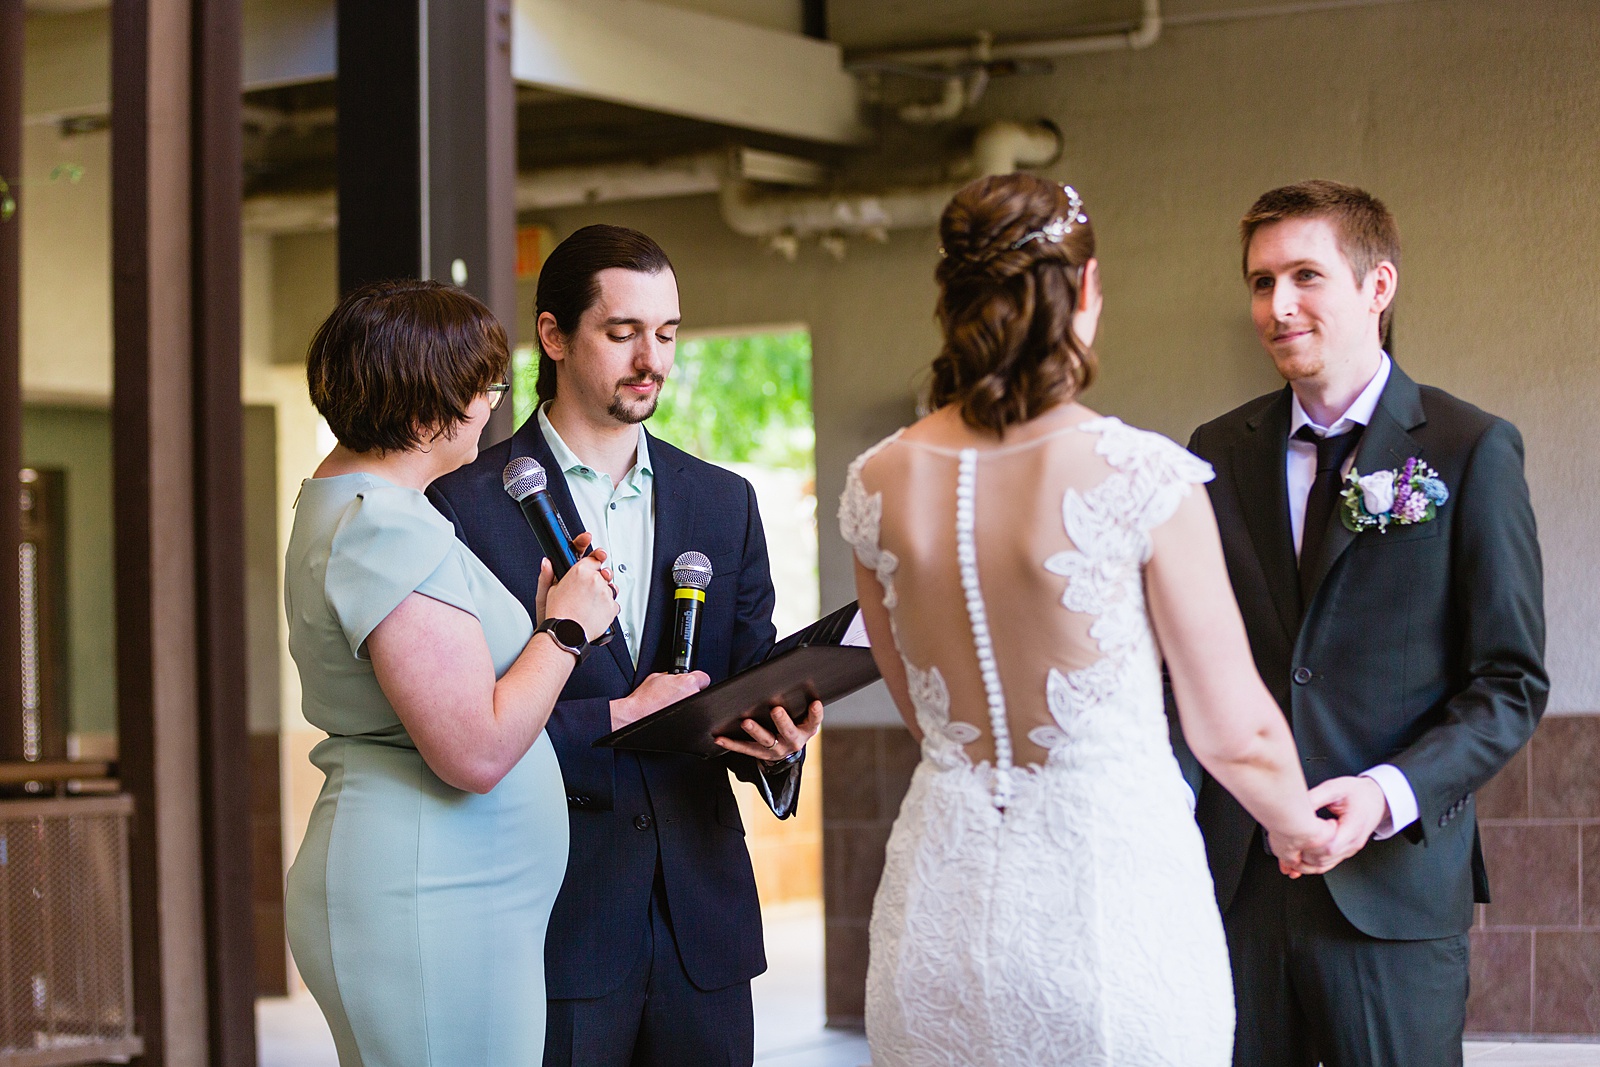 Groom looking at his bride during their wedding ceremony at Chandler Community Center by Chandler wedding photographer PMA Photography.